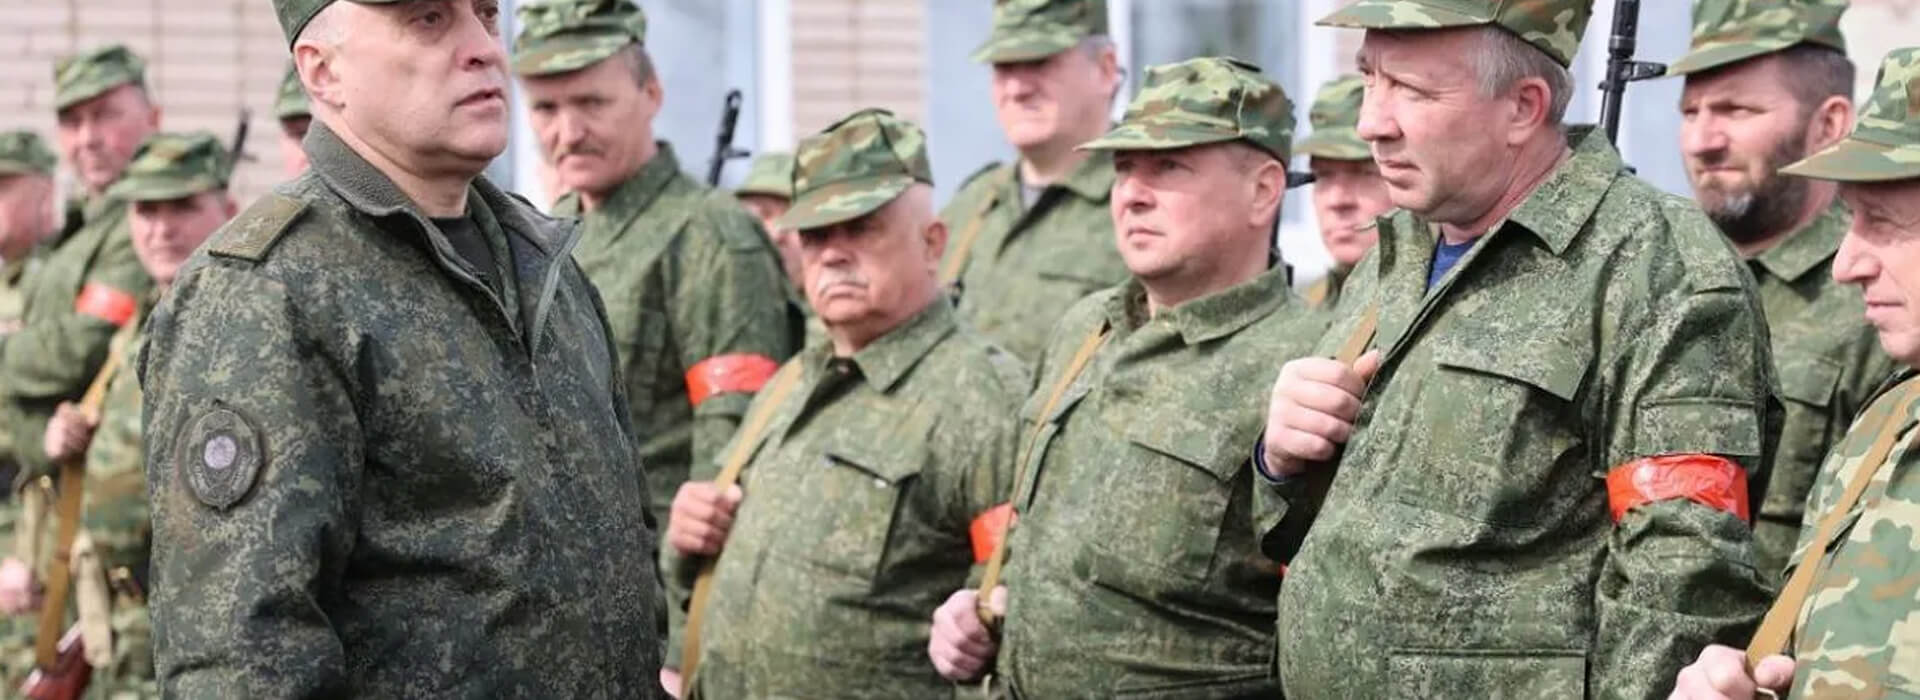 iSANS: Belarusian armed forces are being integrated into Russia’s army